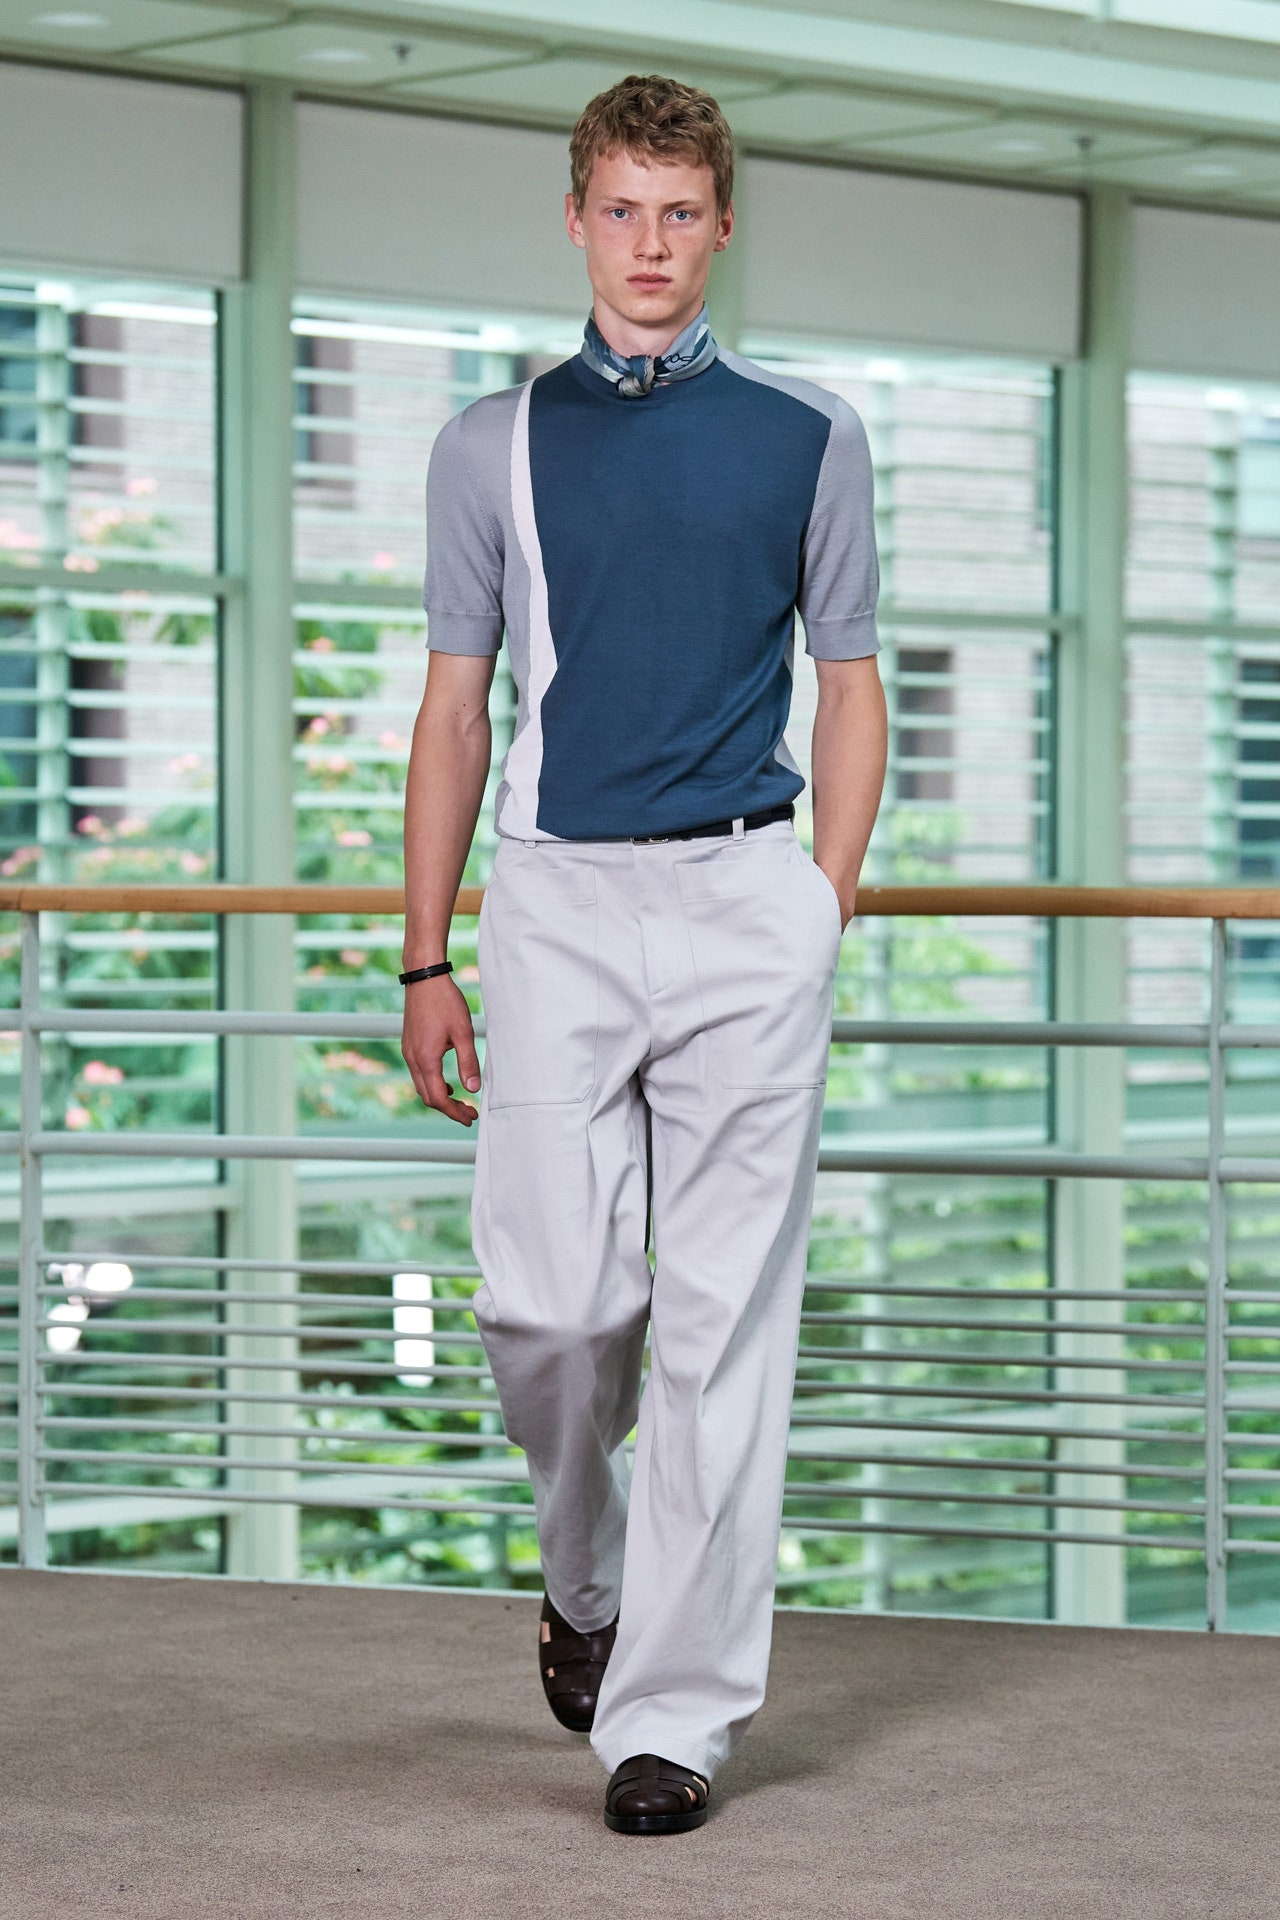 Hermés Spring-Summer 2021 Collection - Male Fashion Trends